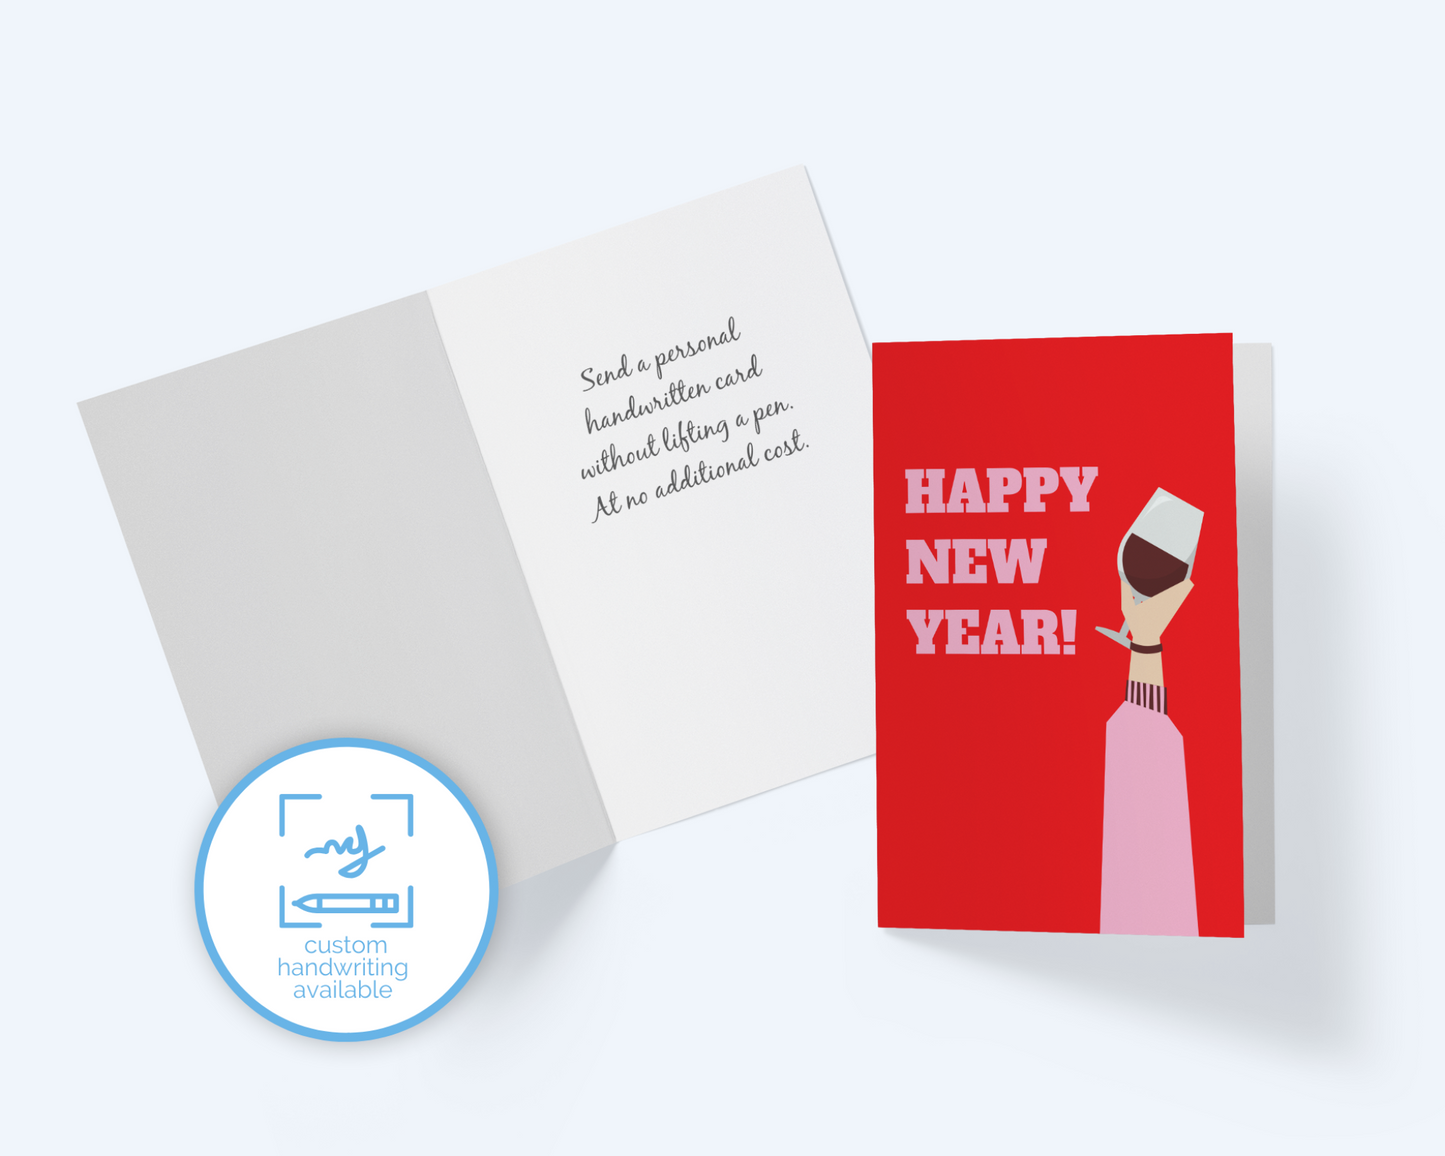 Happy New Year Greeting  Card : Wine Lover's New Year Card.